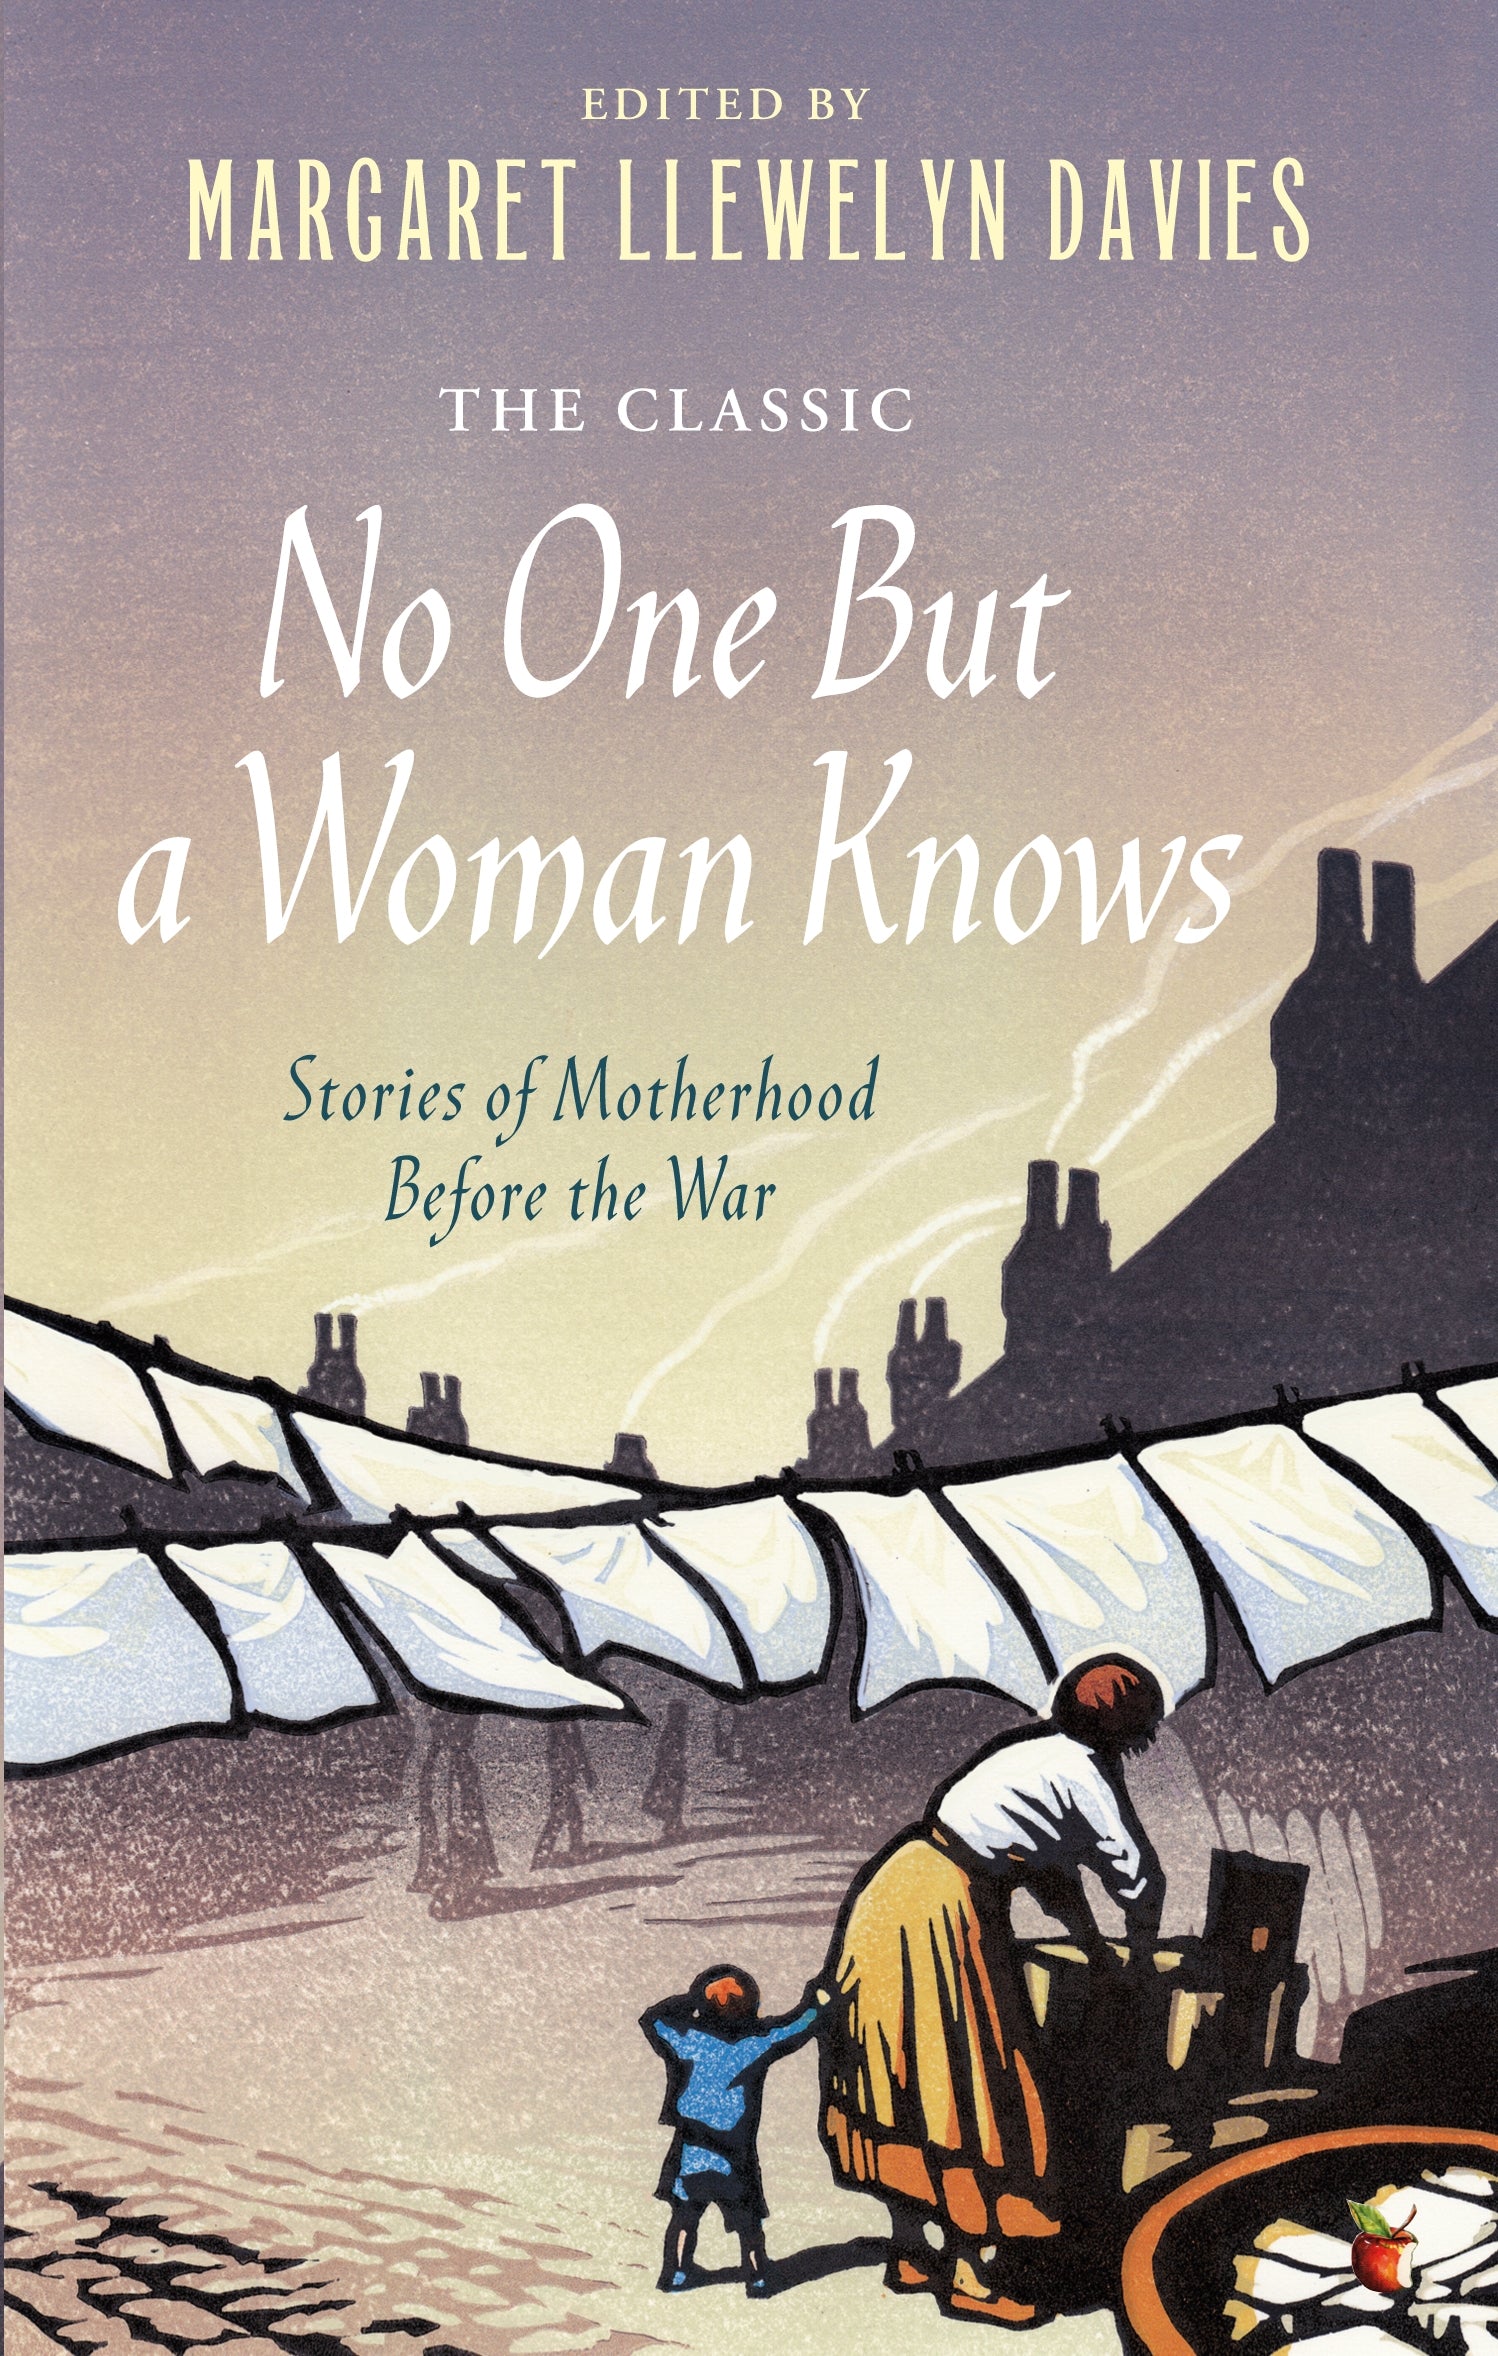 No One But a Woman Knows by Margaret Llewelyn Davies